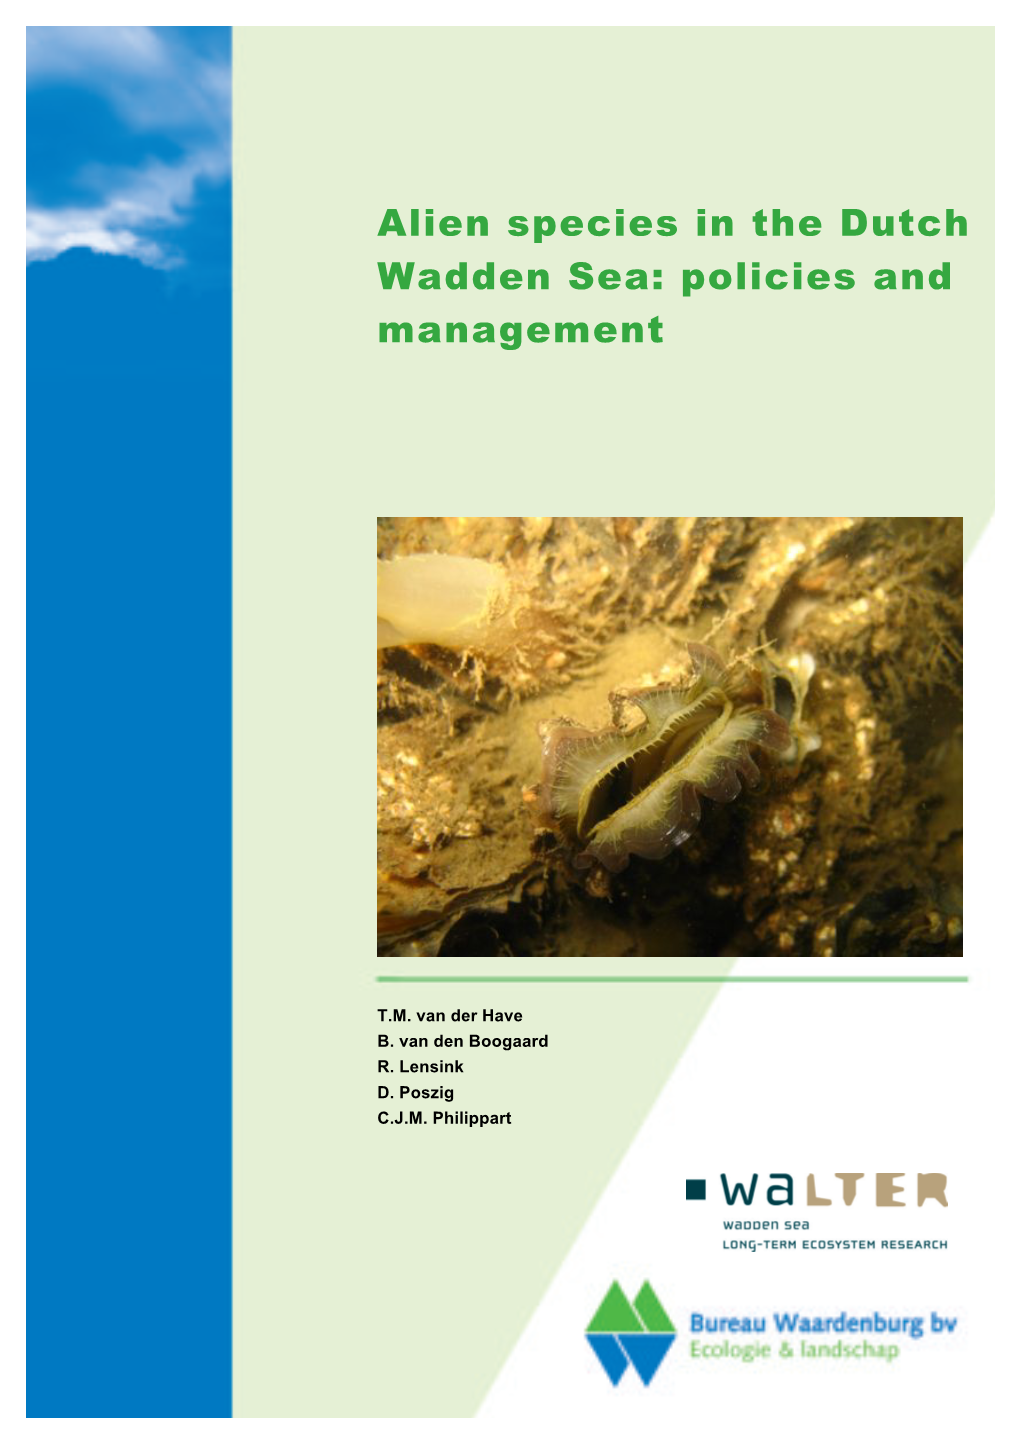 14-687 AS Policies and Management Wadden Sea Final Draft Clean V2